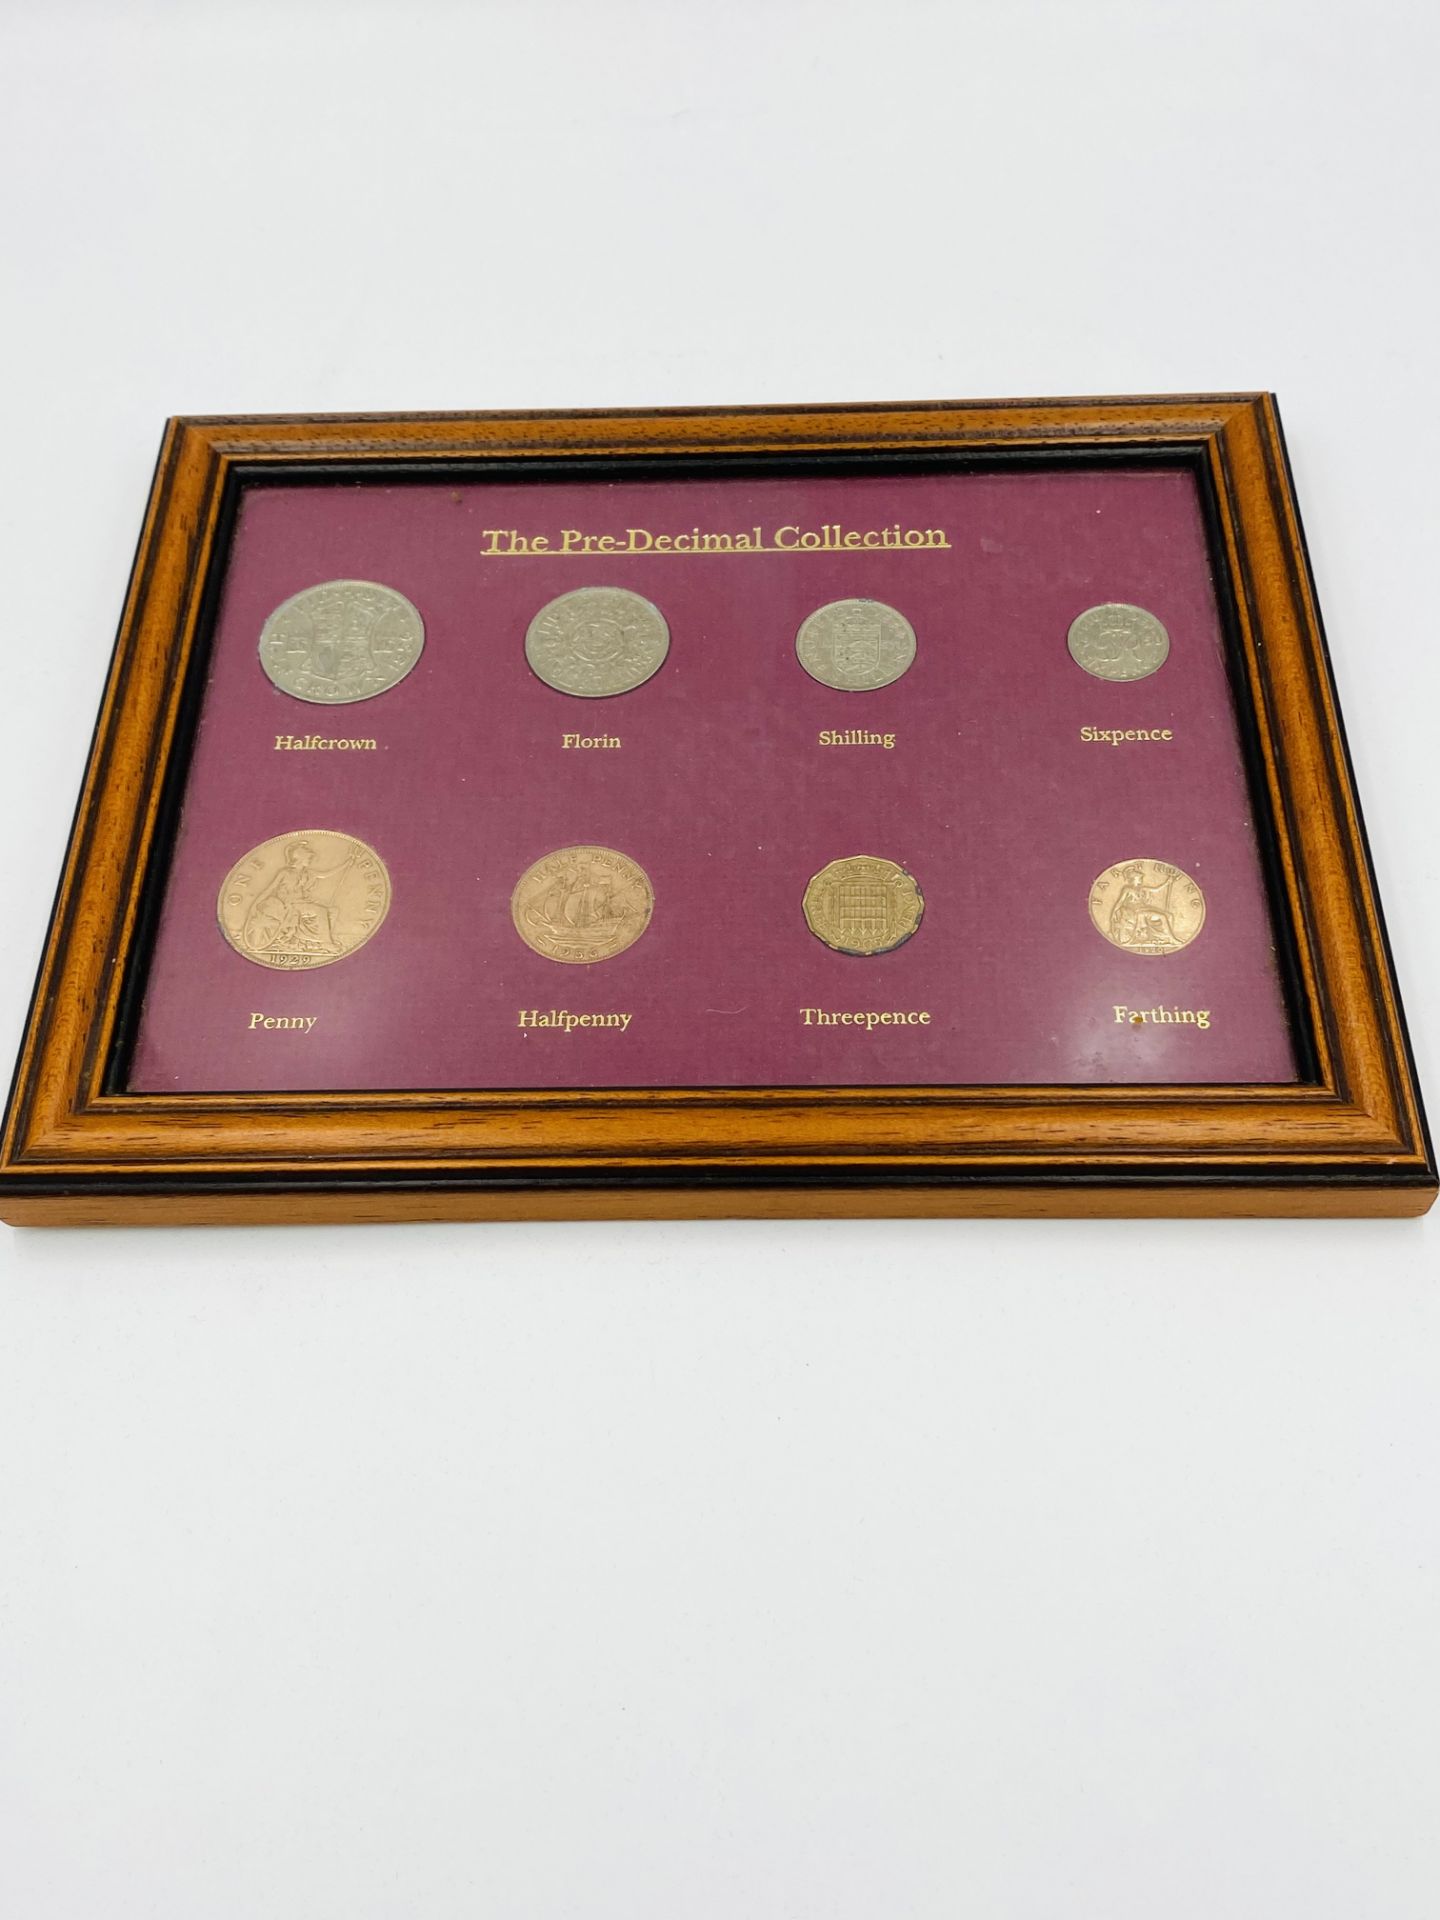 Jubilee Mint 50th Anniversary of Decimalisation fine silver proof coin collection - Image 5 of 6